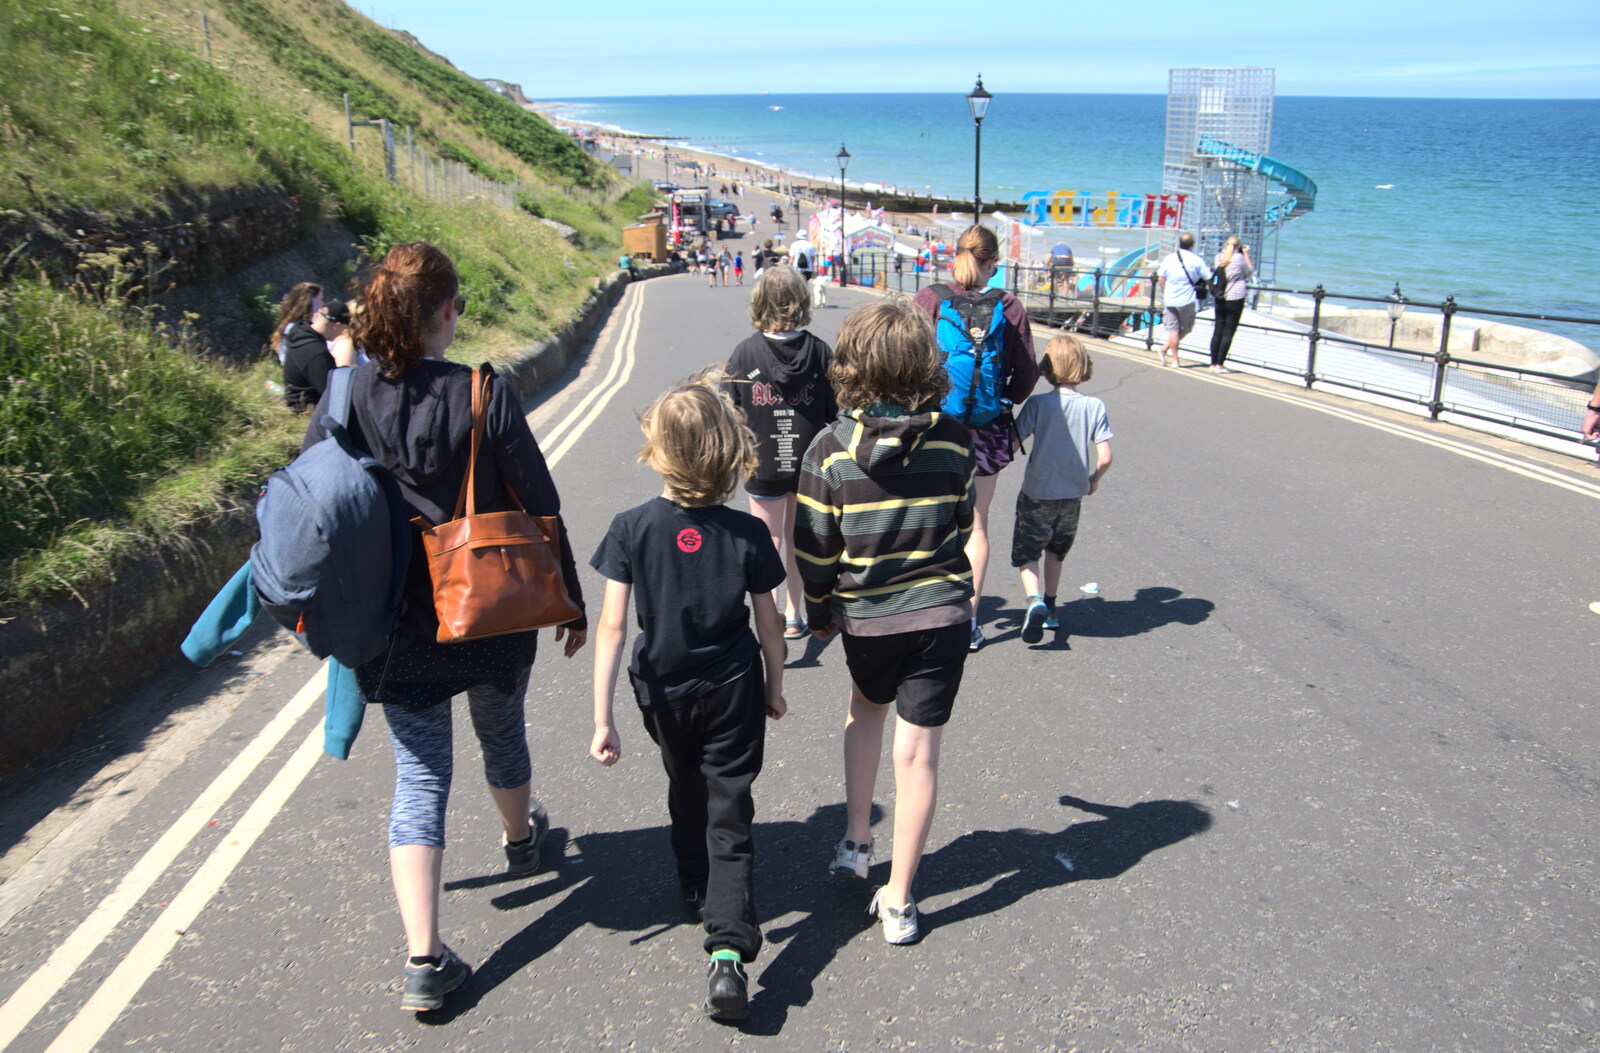 Heading down to the beach again from Camping on the Coast, East Runton, North Norfolk - 25th July 2020